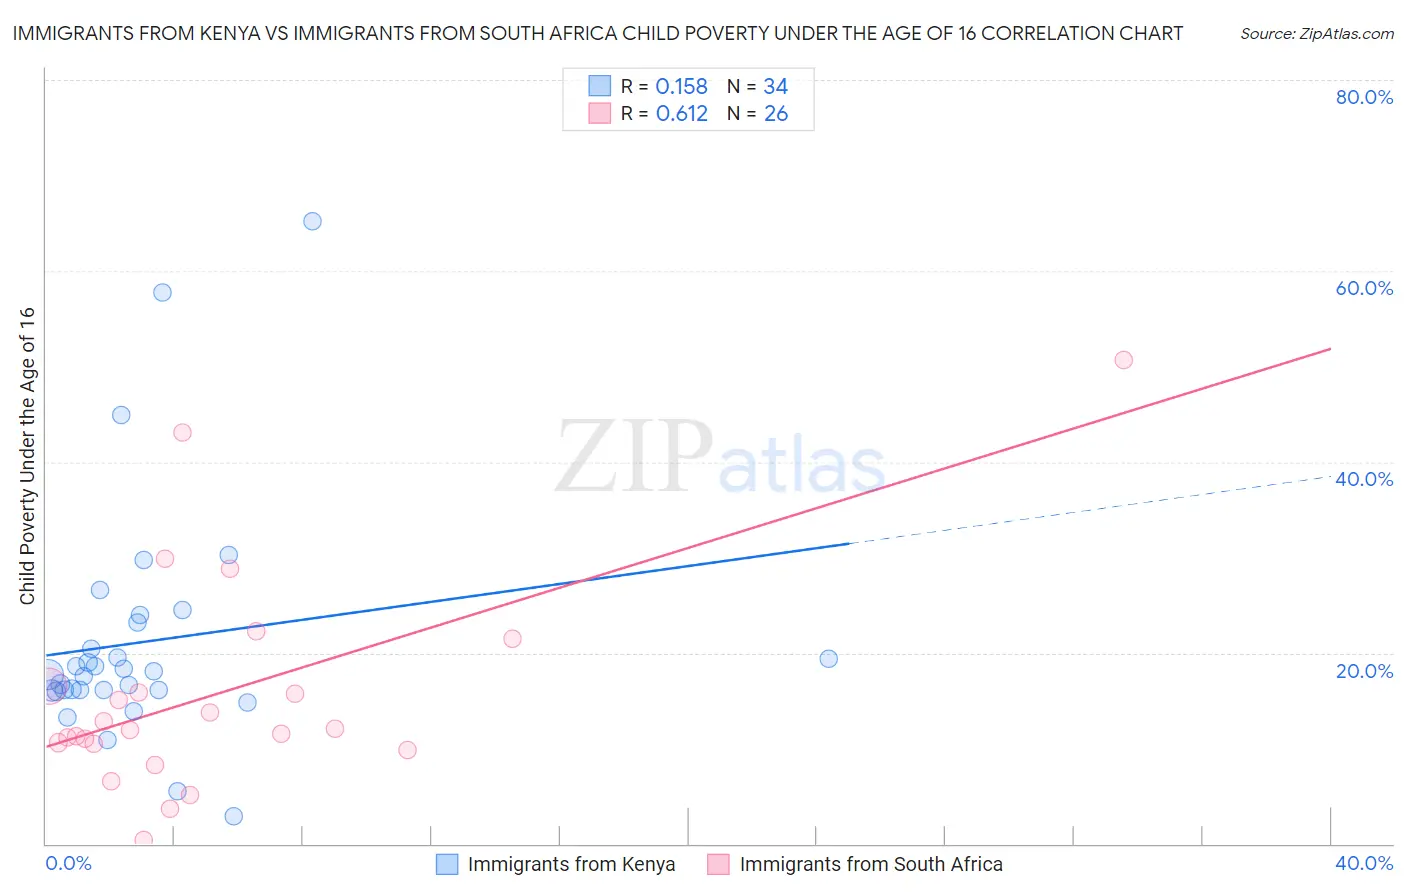 Immigrants from Kenya vs Immigrants from South Africa Child Poverty Under the Age of 16